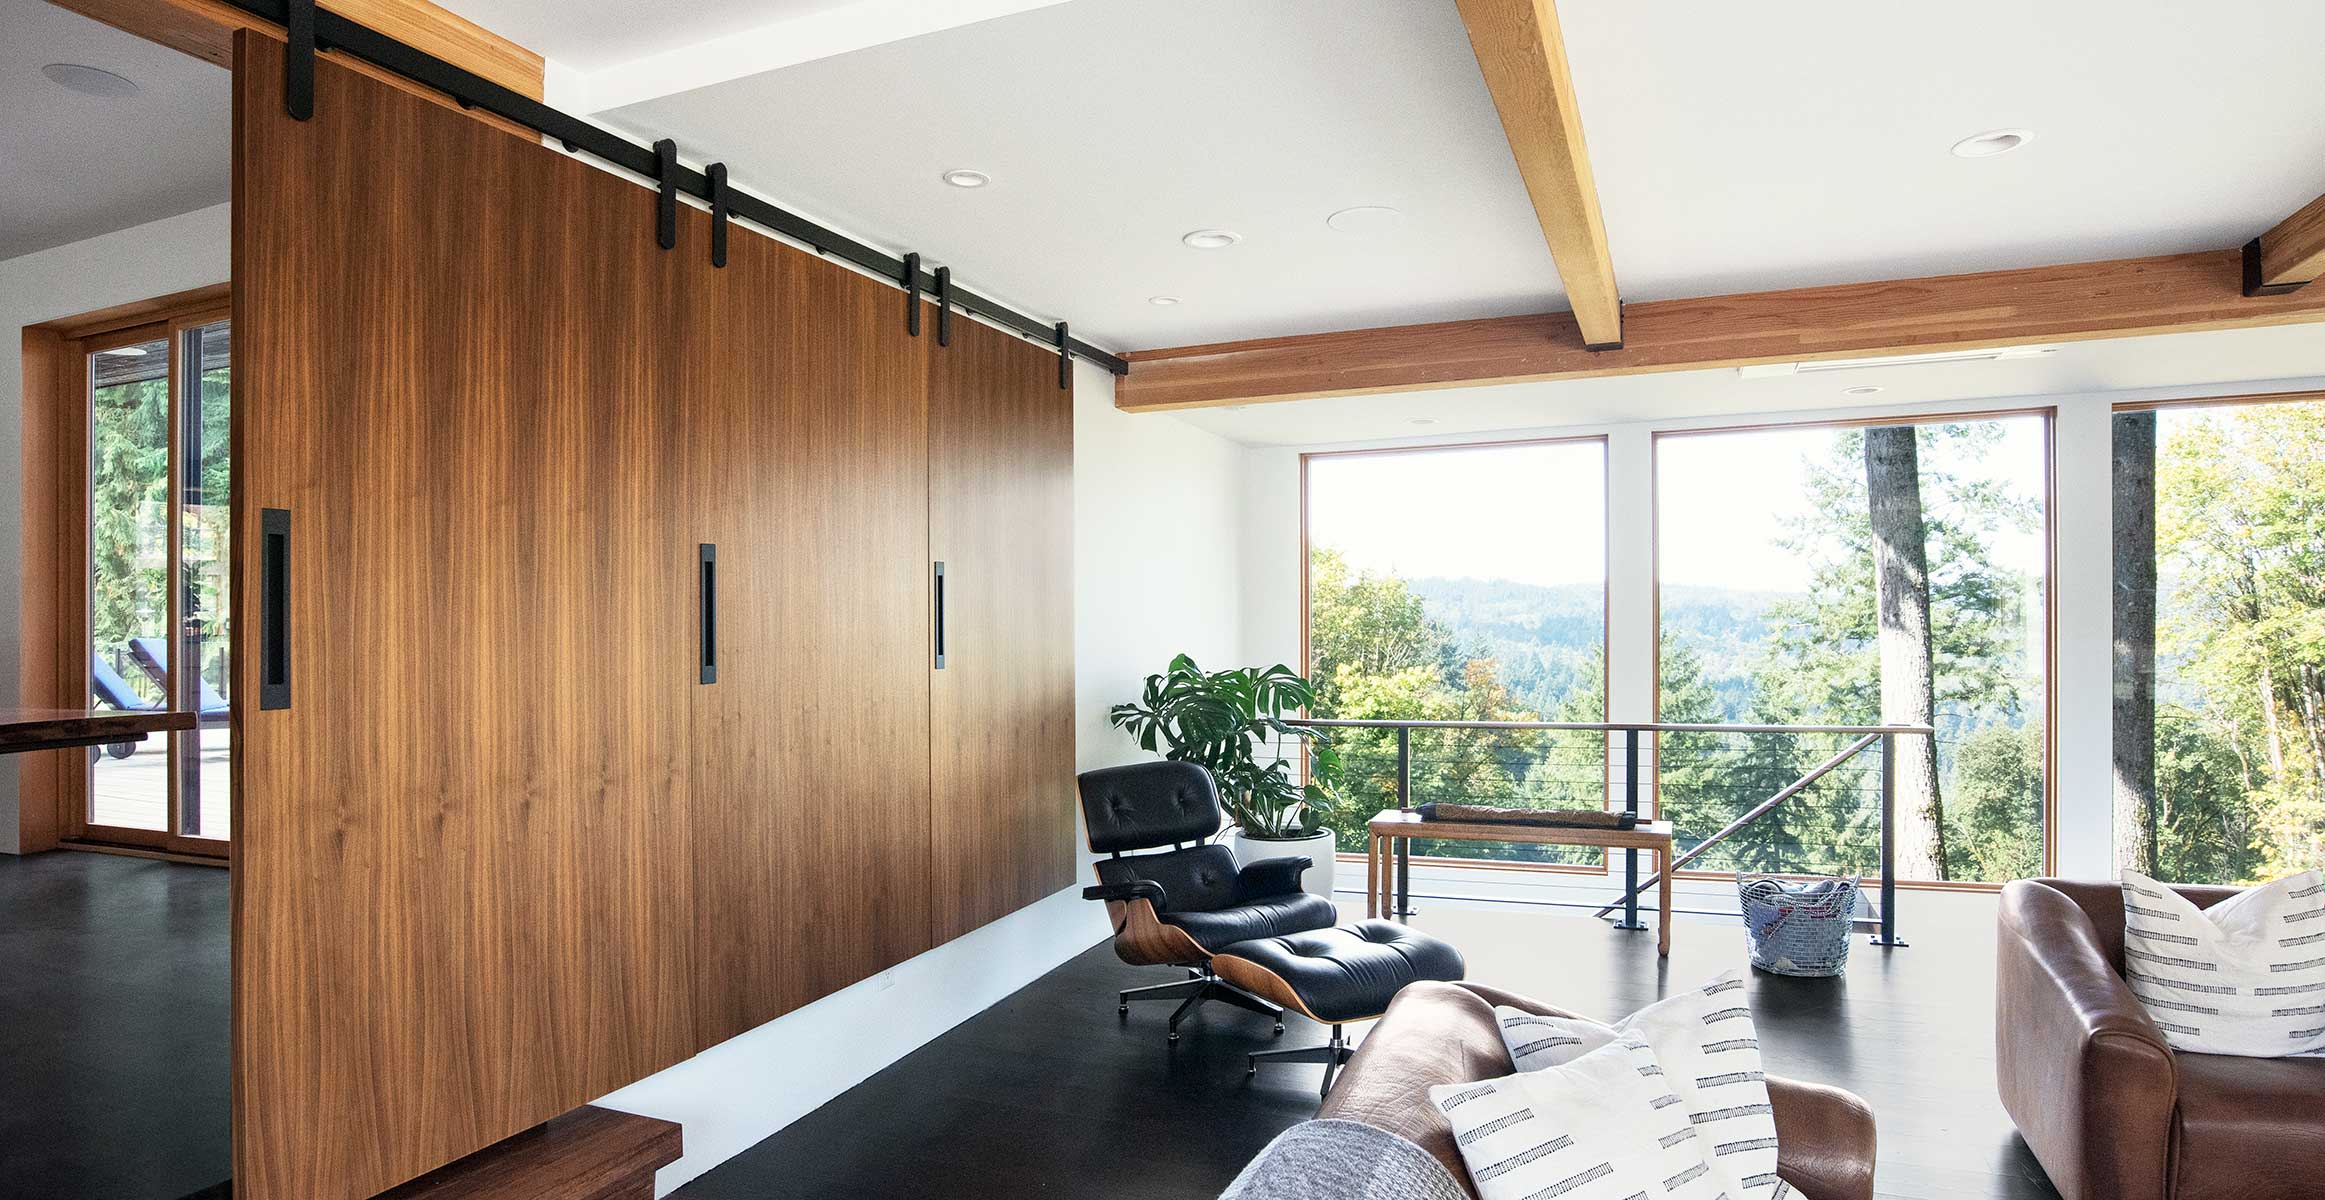 Walnut doors with recessed linear door pull by Krownlab in black stainless finish in modern living room.